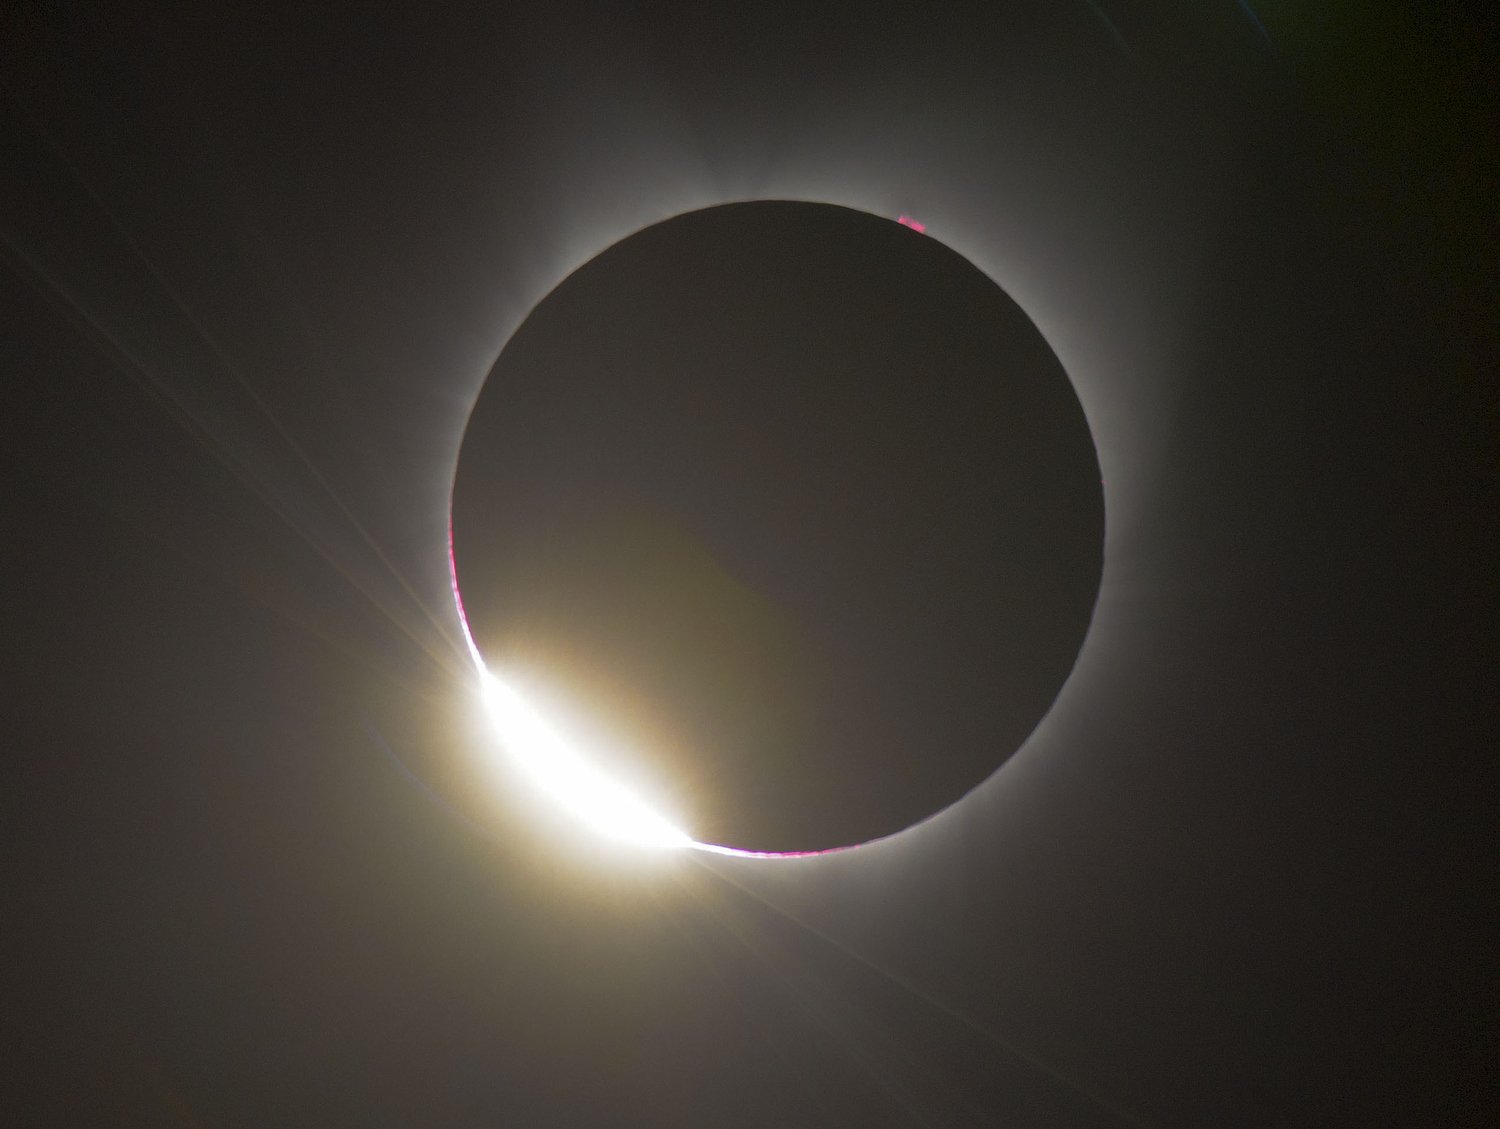  The last bit of sunlight disappears behind the moon in aphenomenon commonly called the "Diamond Ring" during the total solar eclipse near Mitchell, OR on Monday, August 21, 2017. 